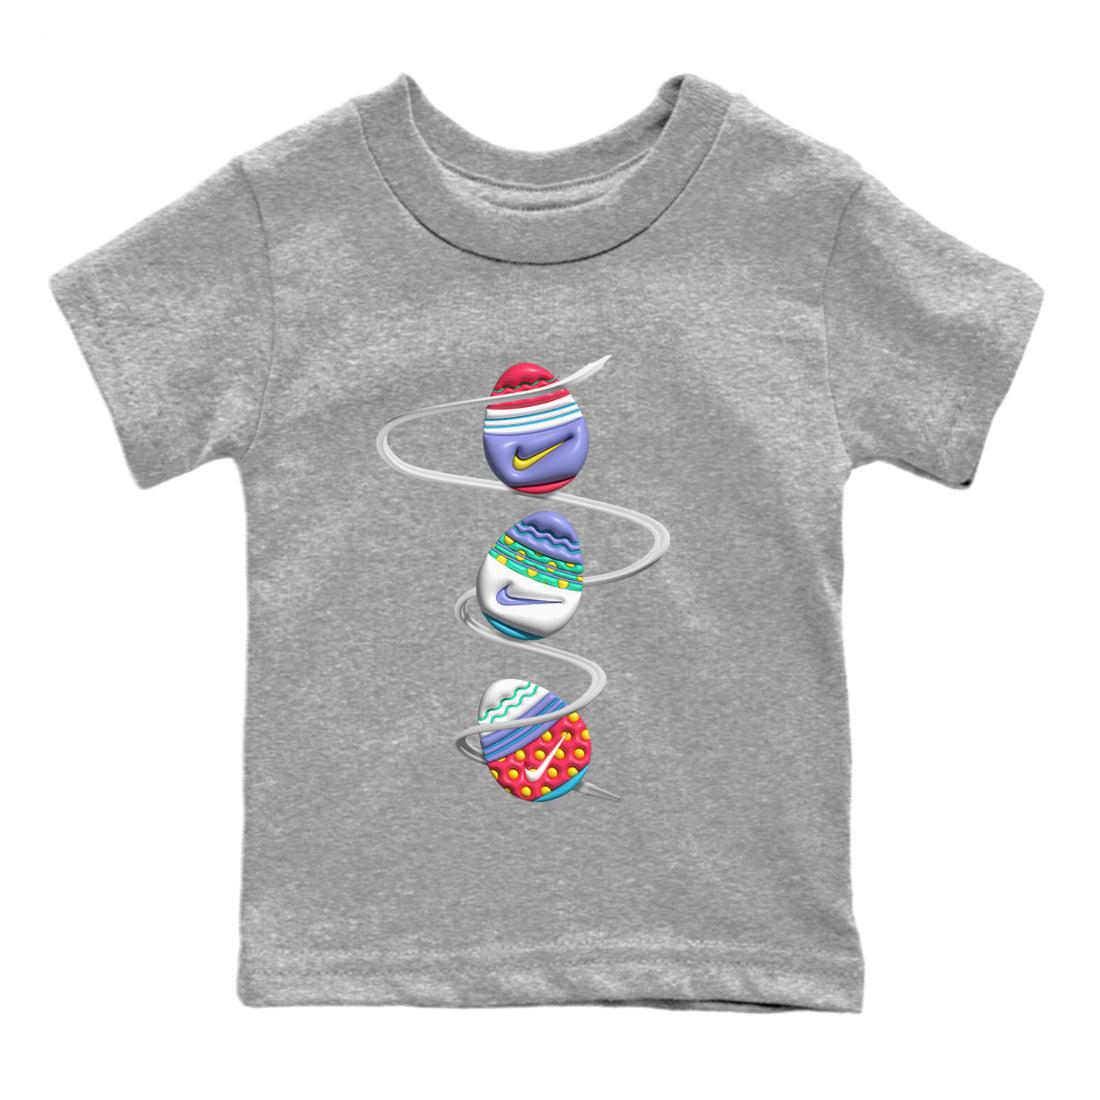 Dunk Easter Candy Sneaker Tees Drip Gear Zone 3D Easter Eggs Sneaker Tees Nike Easter Shirt Kids Shirts Heather Grey 2